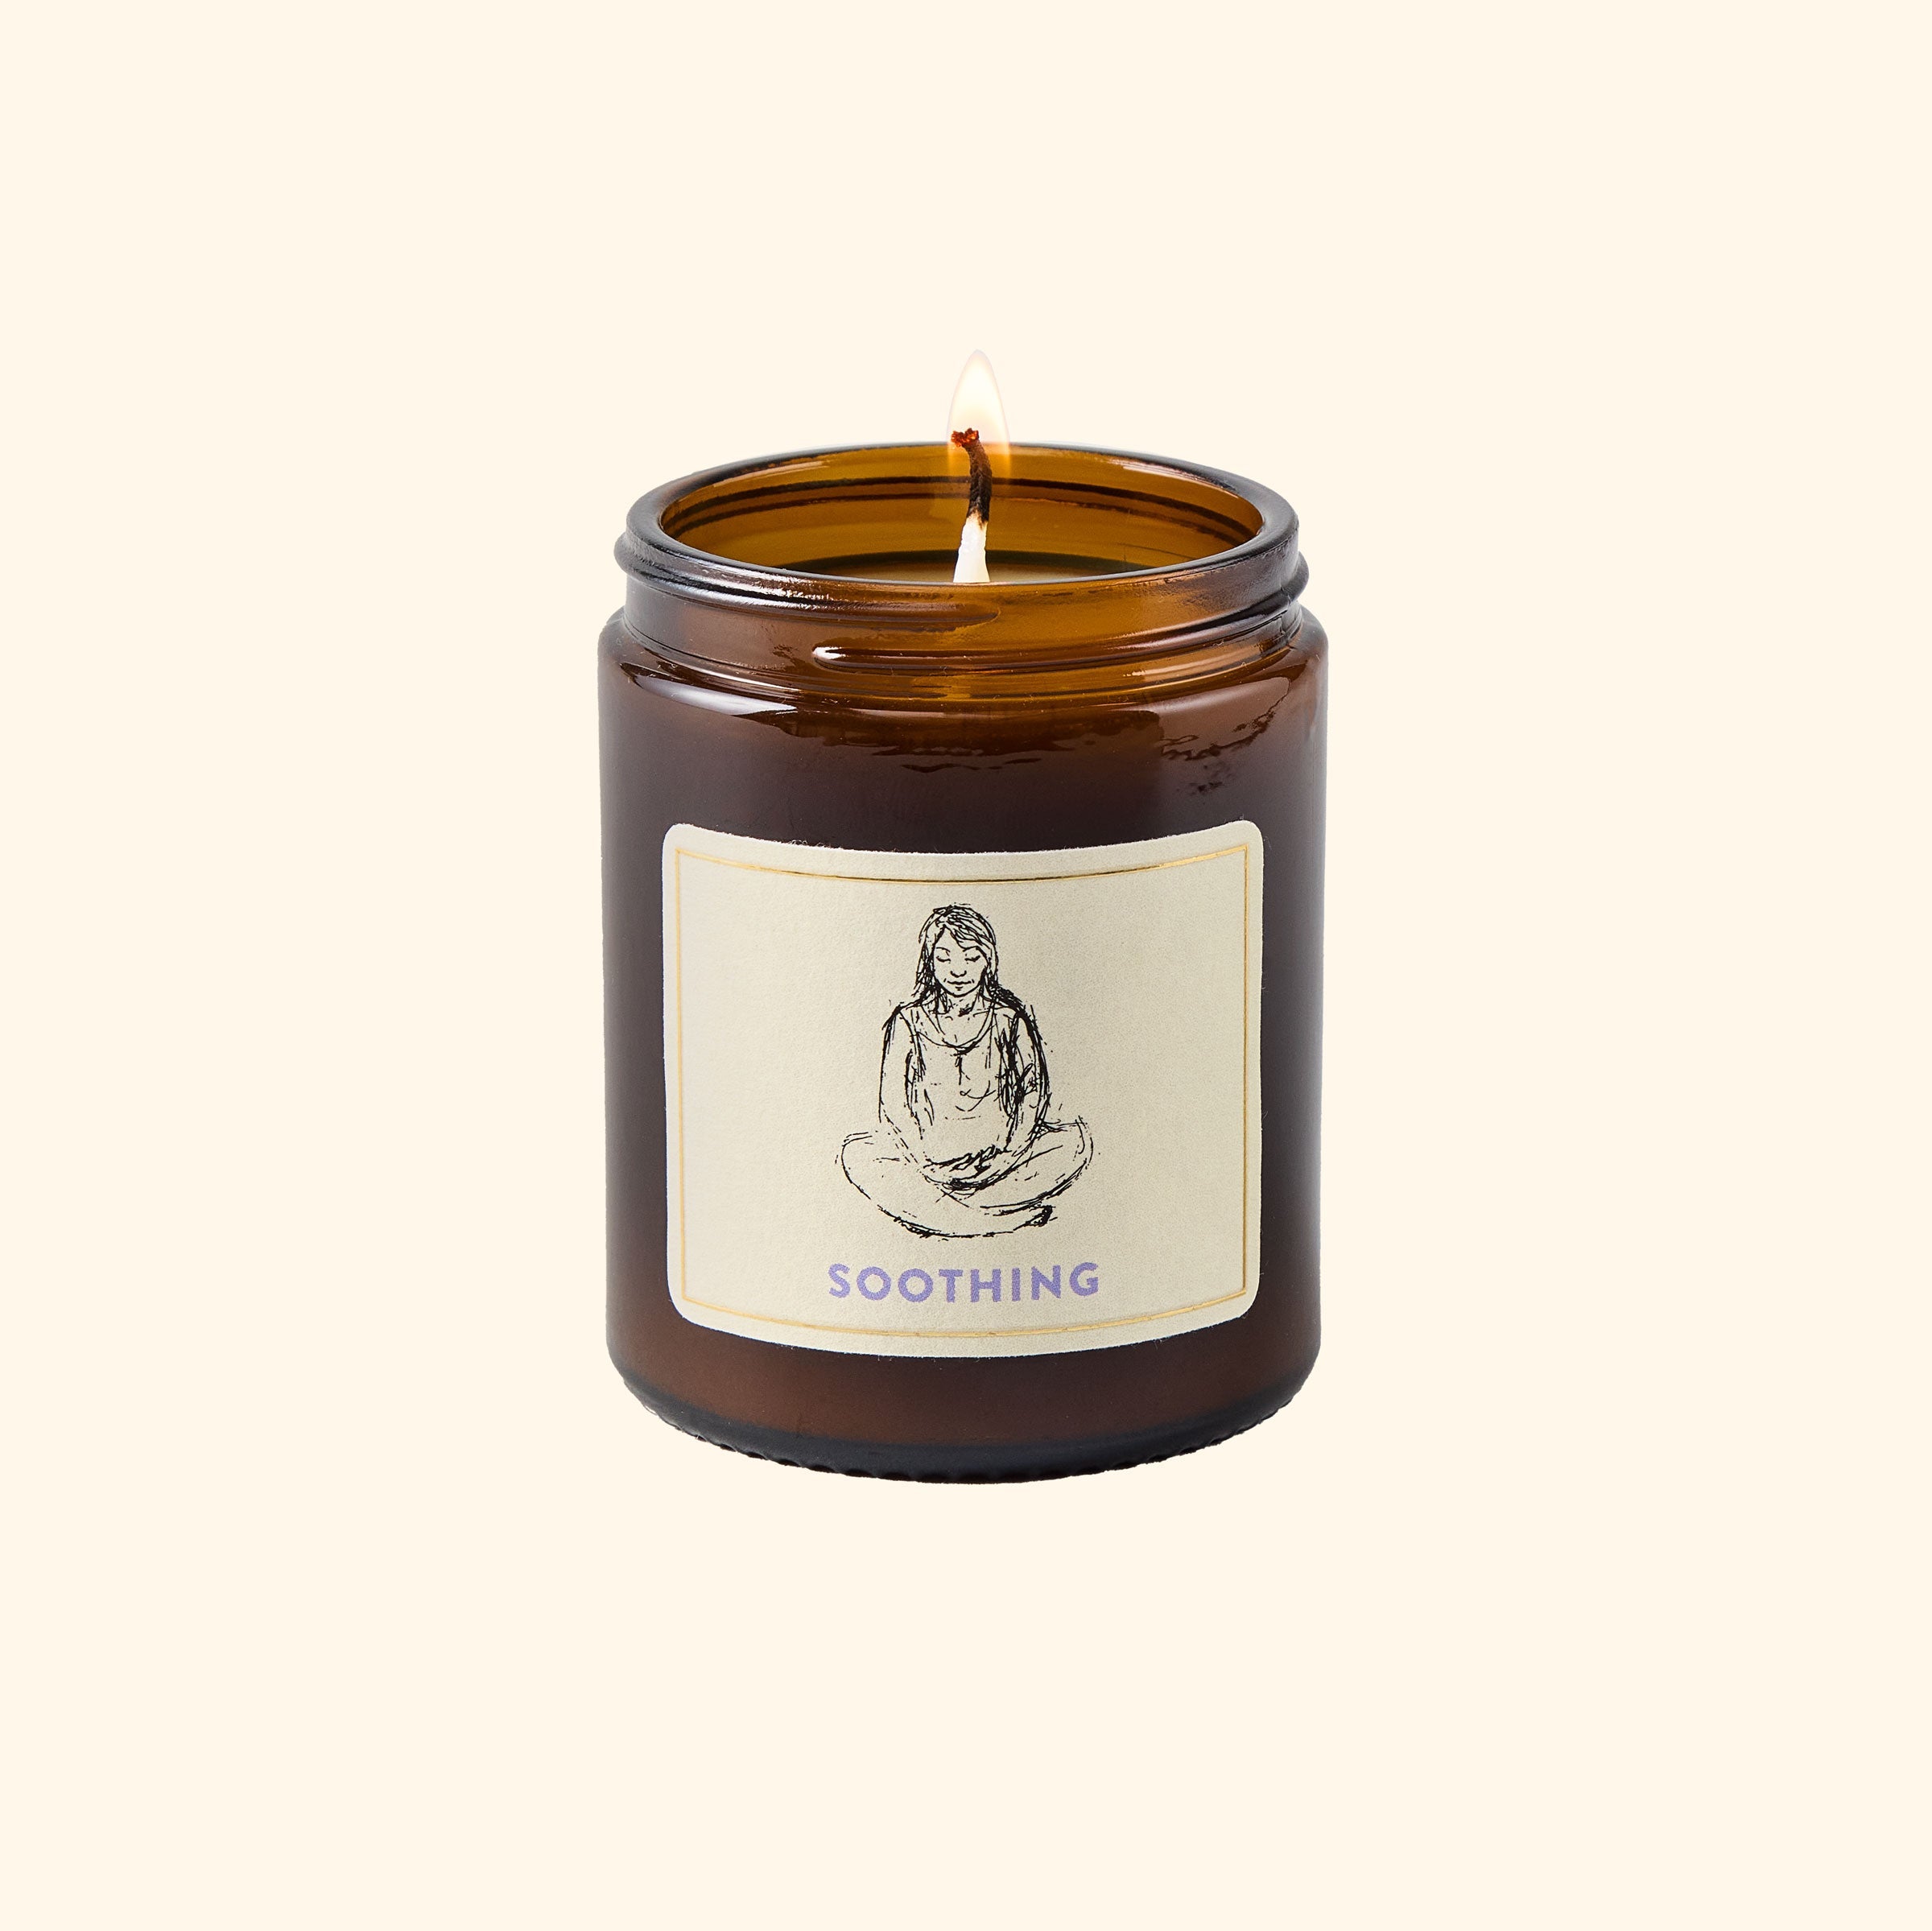 KLORIS Soothing Scented Candle